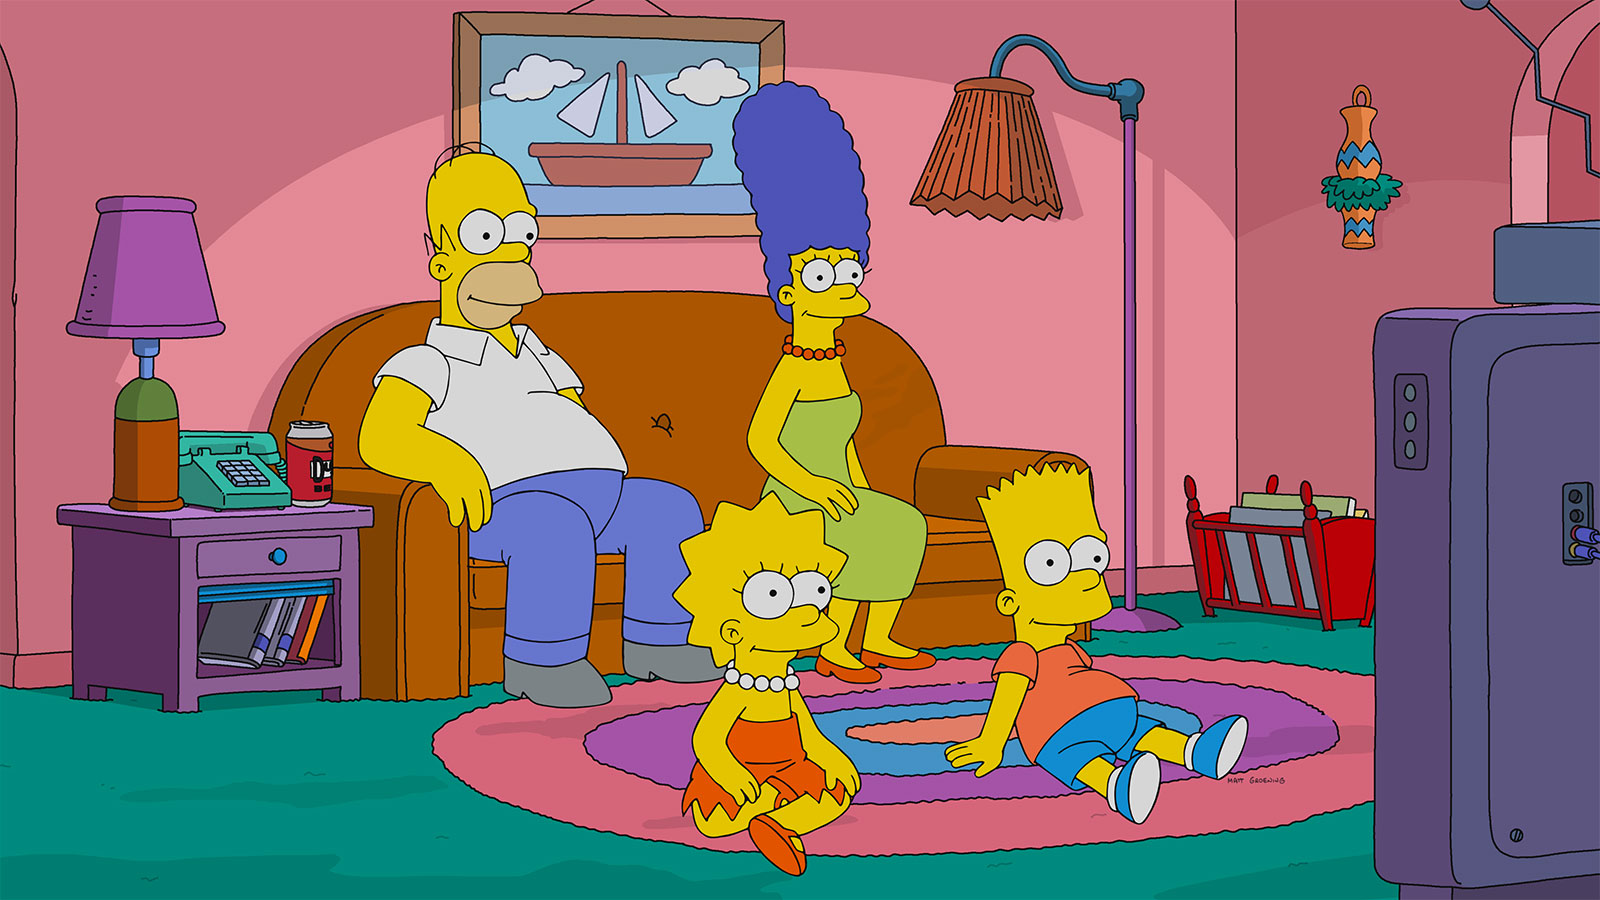 Remove 1 Character from These Famous TV Shows to Find Out What Award You’ll Win The Simpsons